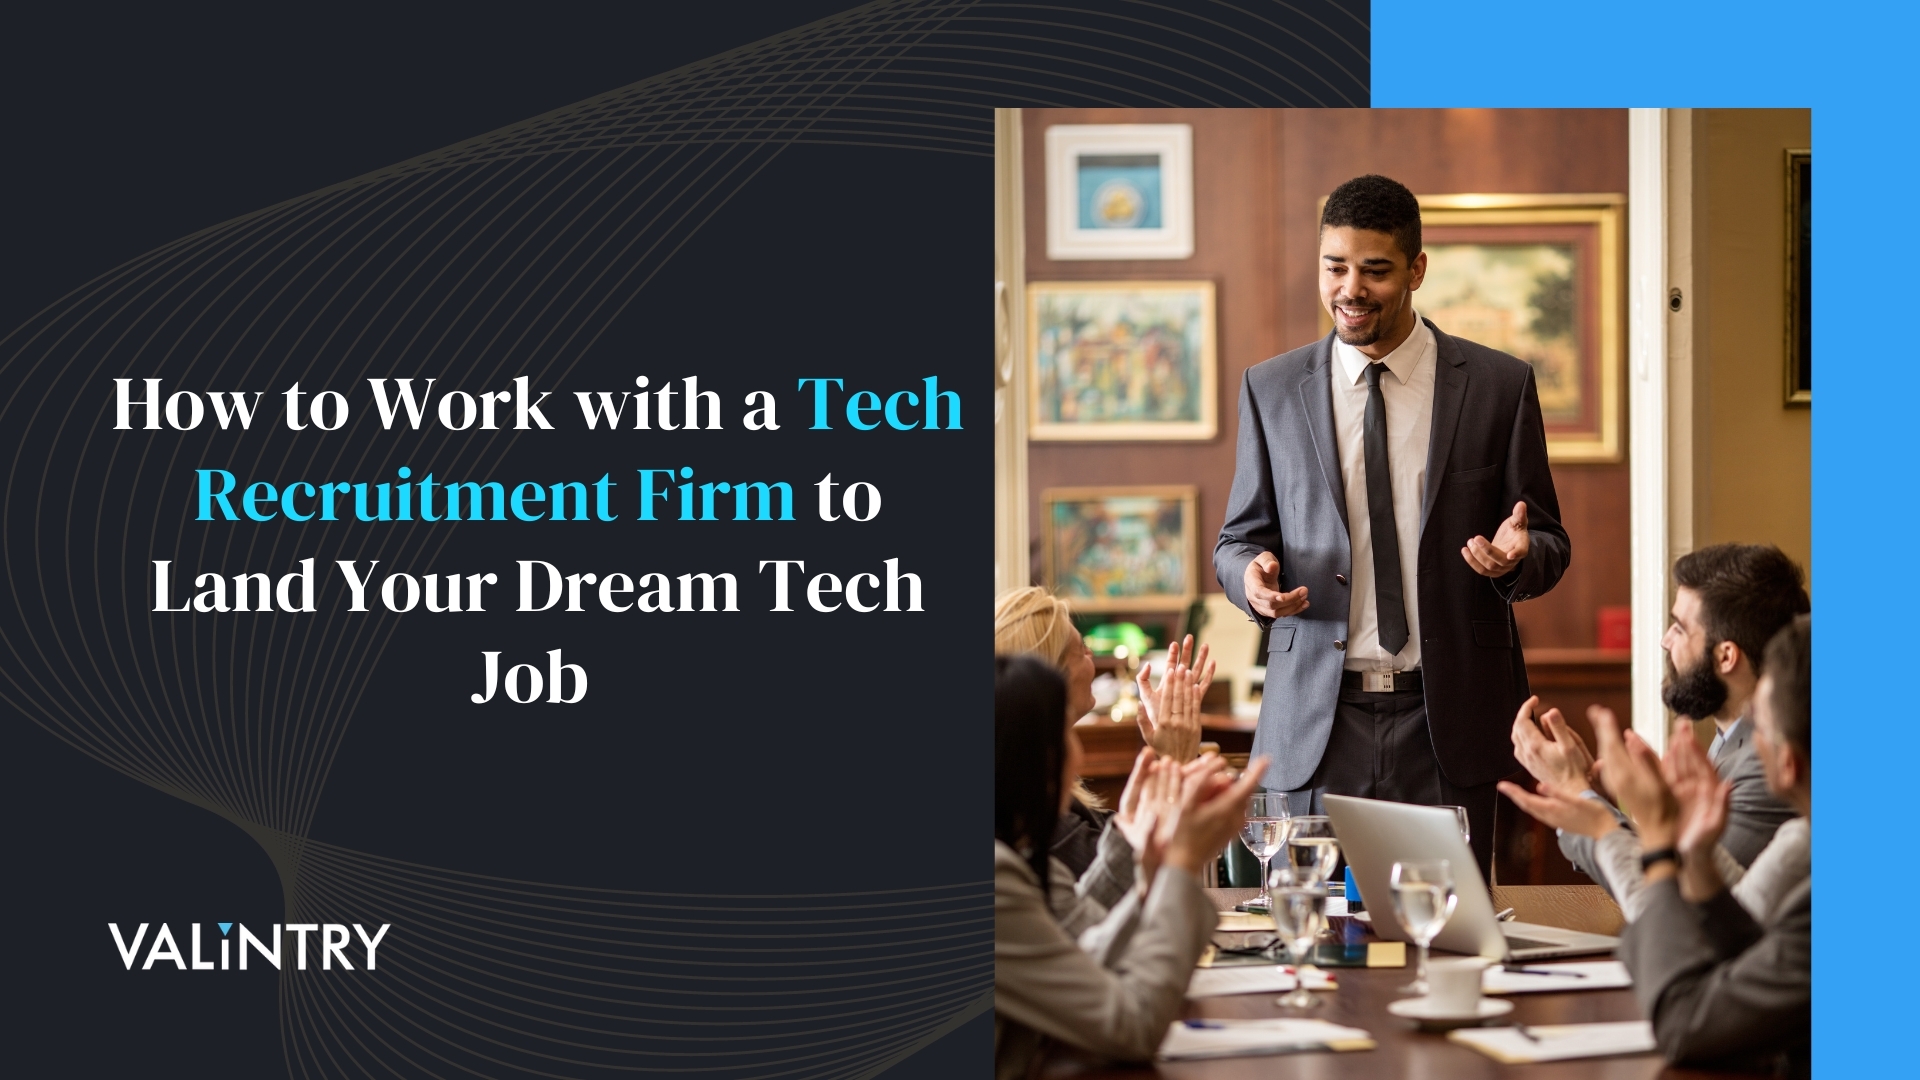 How to Work with a Tech Recruitment Firm to Land Your Dream Tech Job – VALiNTRY